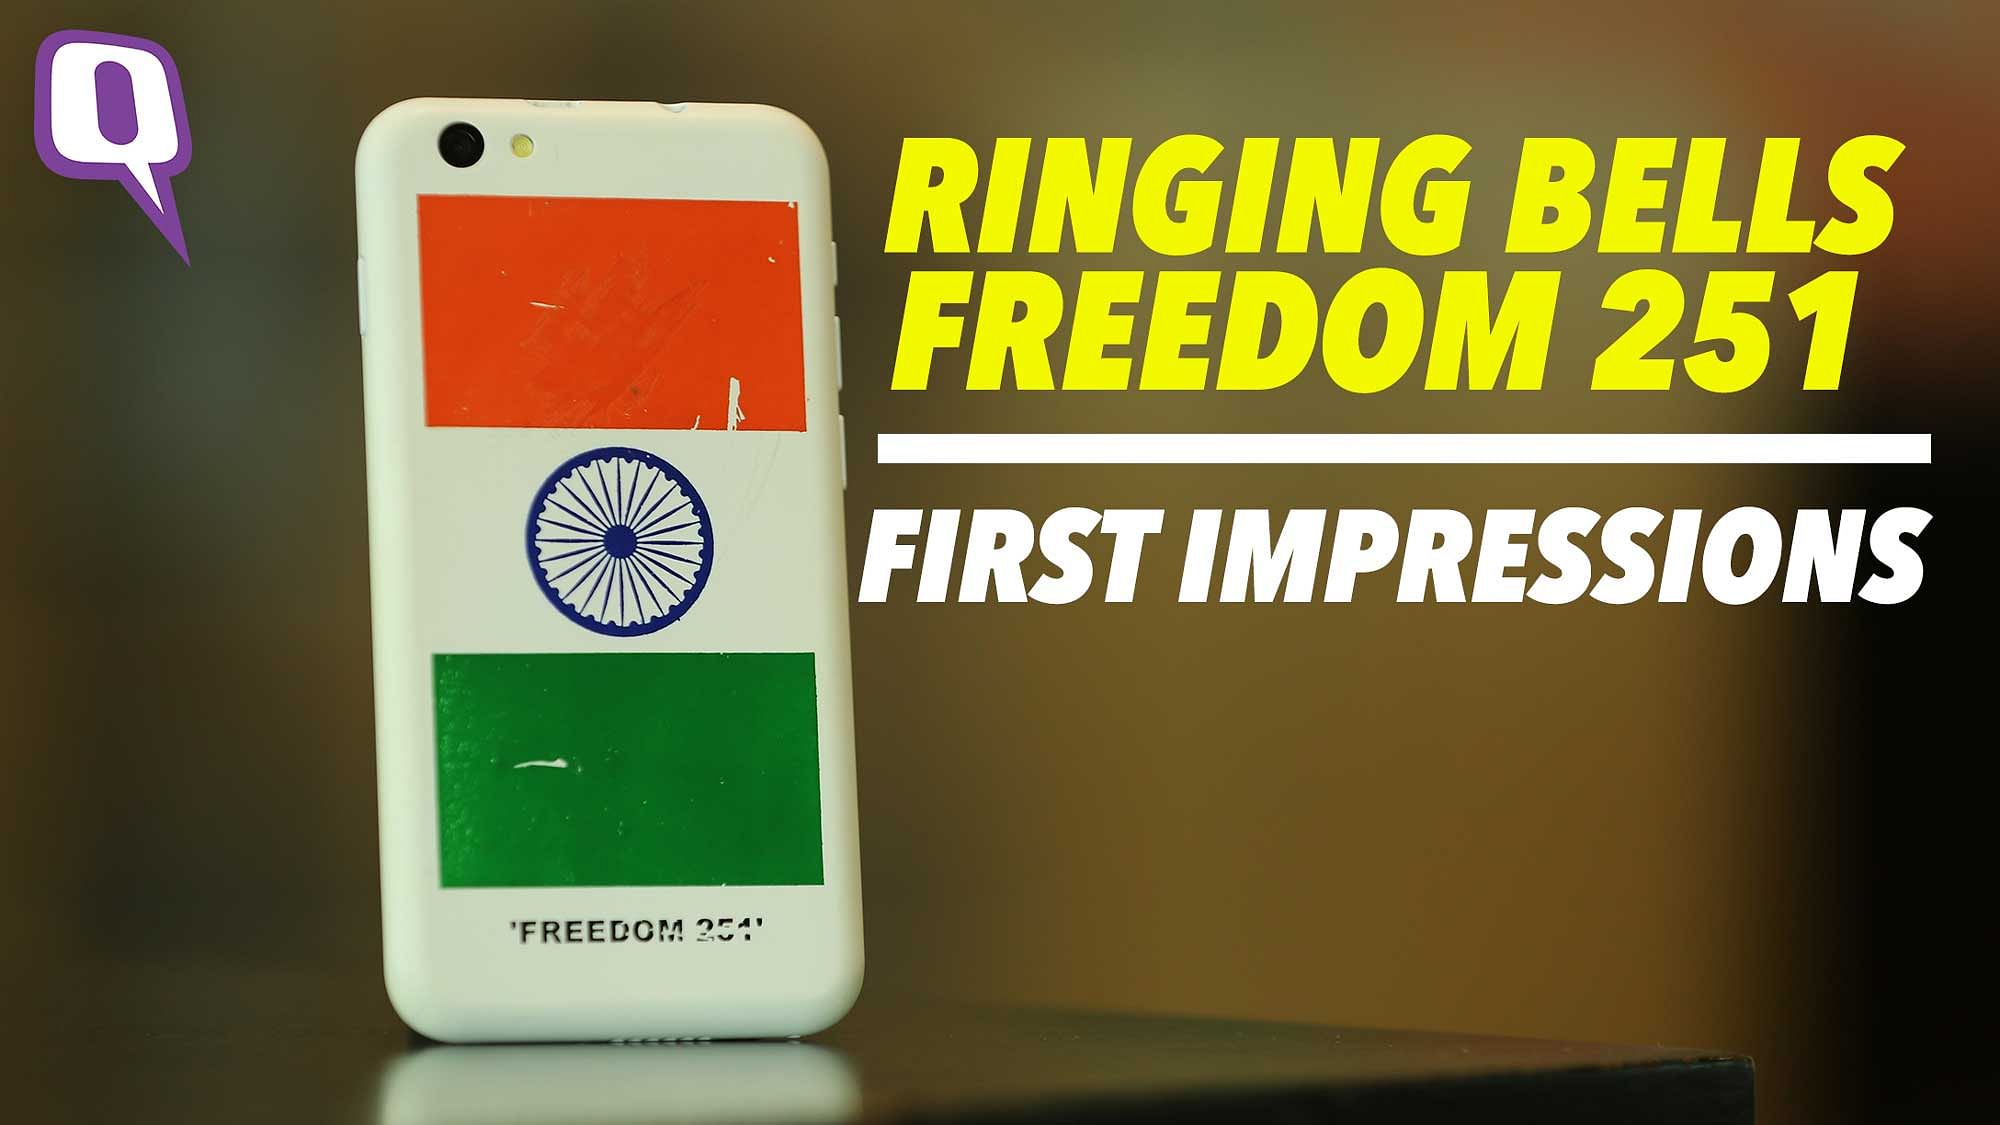 Freedom 251 News: Latest Freedom 251 News, Top Stories, Articles, Photos,  Videos - The Quint